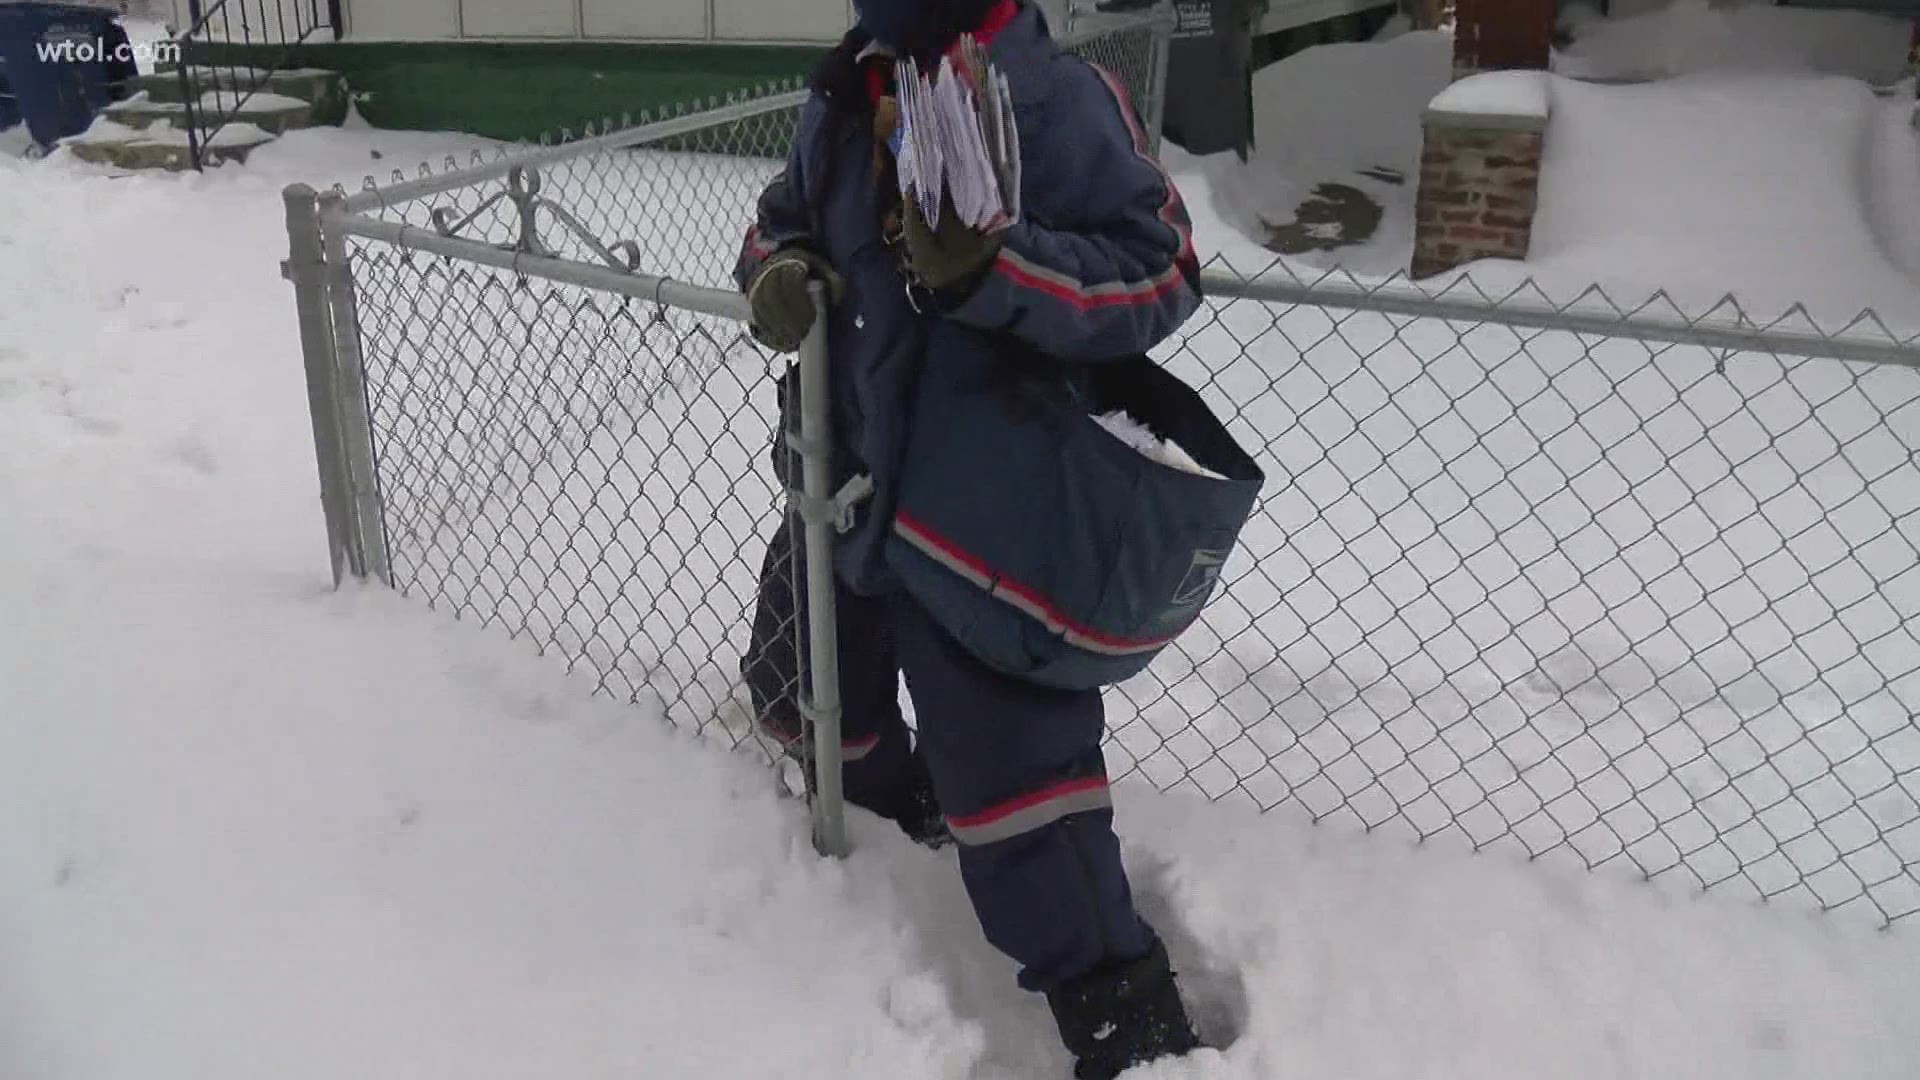 Mail carriers are having a hard time getting to neighbors' mailboxes after heavy snowfall.